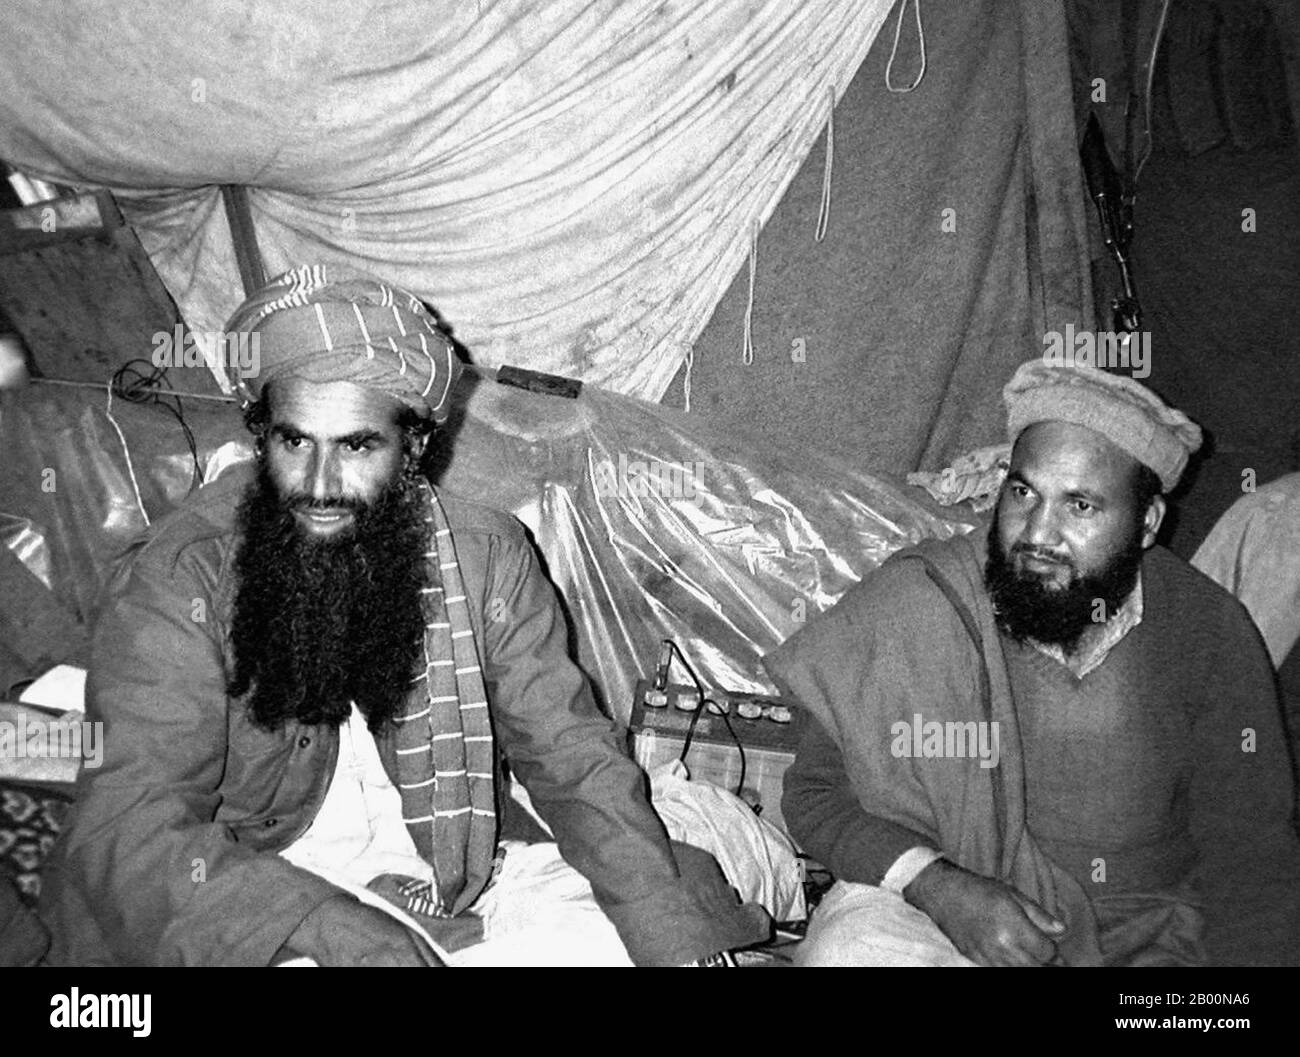 Afghanistan: Mujahideen military commander Abdul Rasul Sayyaf (L) with one of his top lieutenants, Commander Abdullah, Pakti Province, 1984. Photo by Erwin Franzen.  The Soviet War in Afghanistan was a nine-year conflict involving the Soviet Union, supporting the Marxist government of the Democratic Republic of Afghanistan against the indigenous Afghan Mujahideen and foreign ‘Arab–Afghan’ volunteers. The mujahideen found other support from a variety of sources including the United States, Saudi Arabia, the United Kingdom, Pakistan, Egypt, China and other nations, turning it into a proxy war. Stock Photo